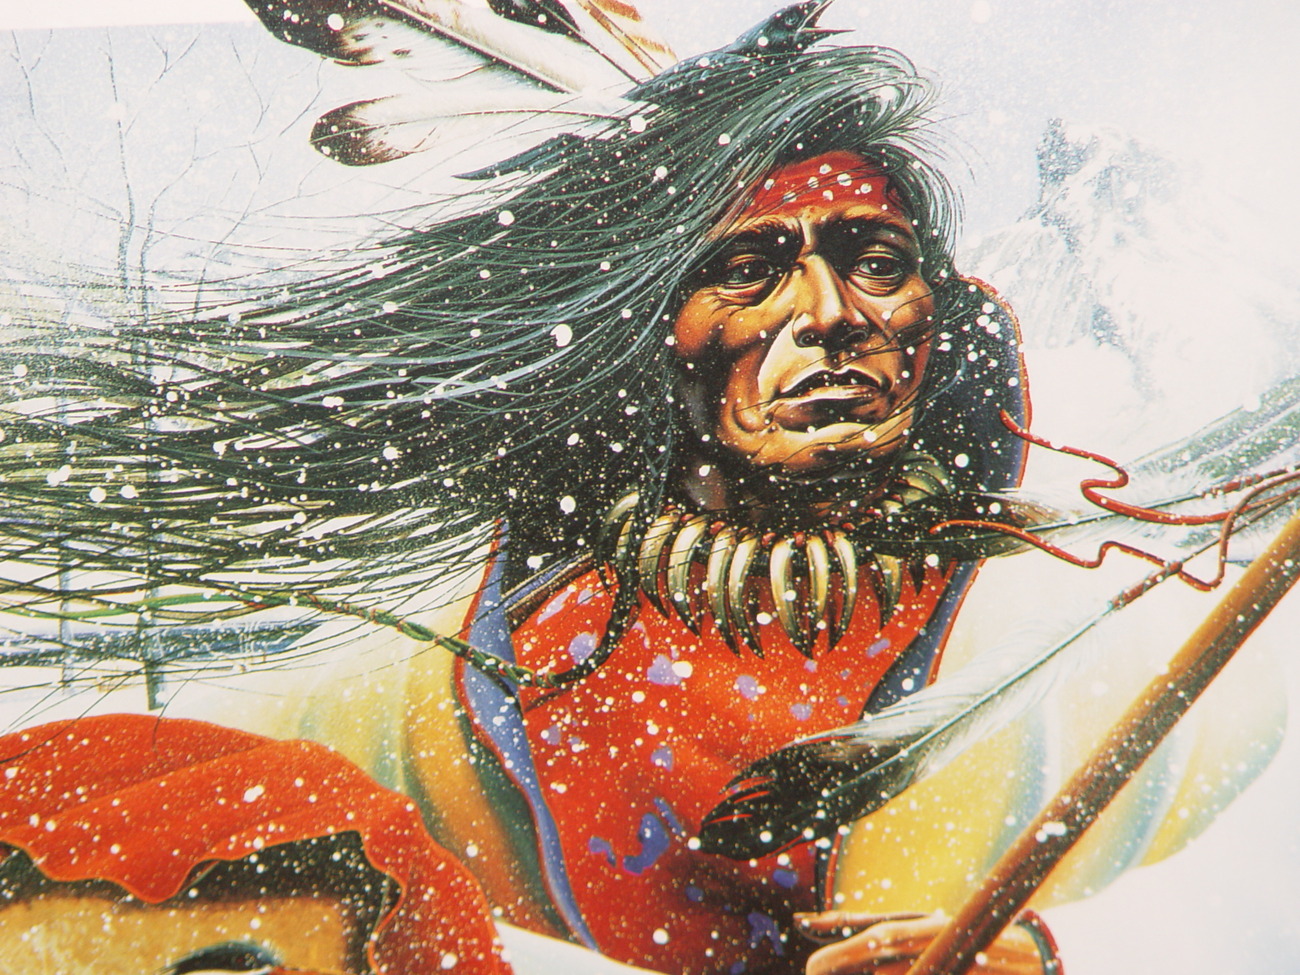 Native American Art Print: "Indian with Shield in Winter" by Artist